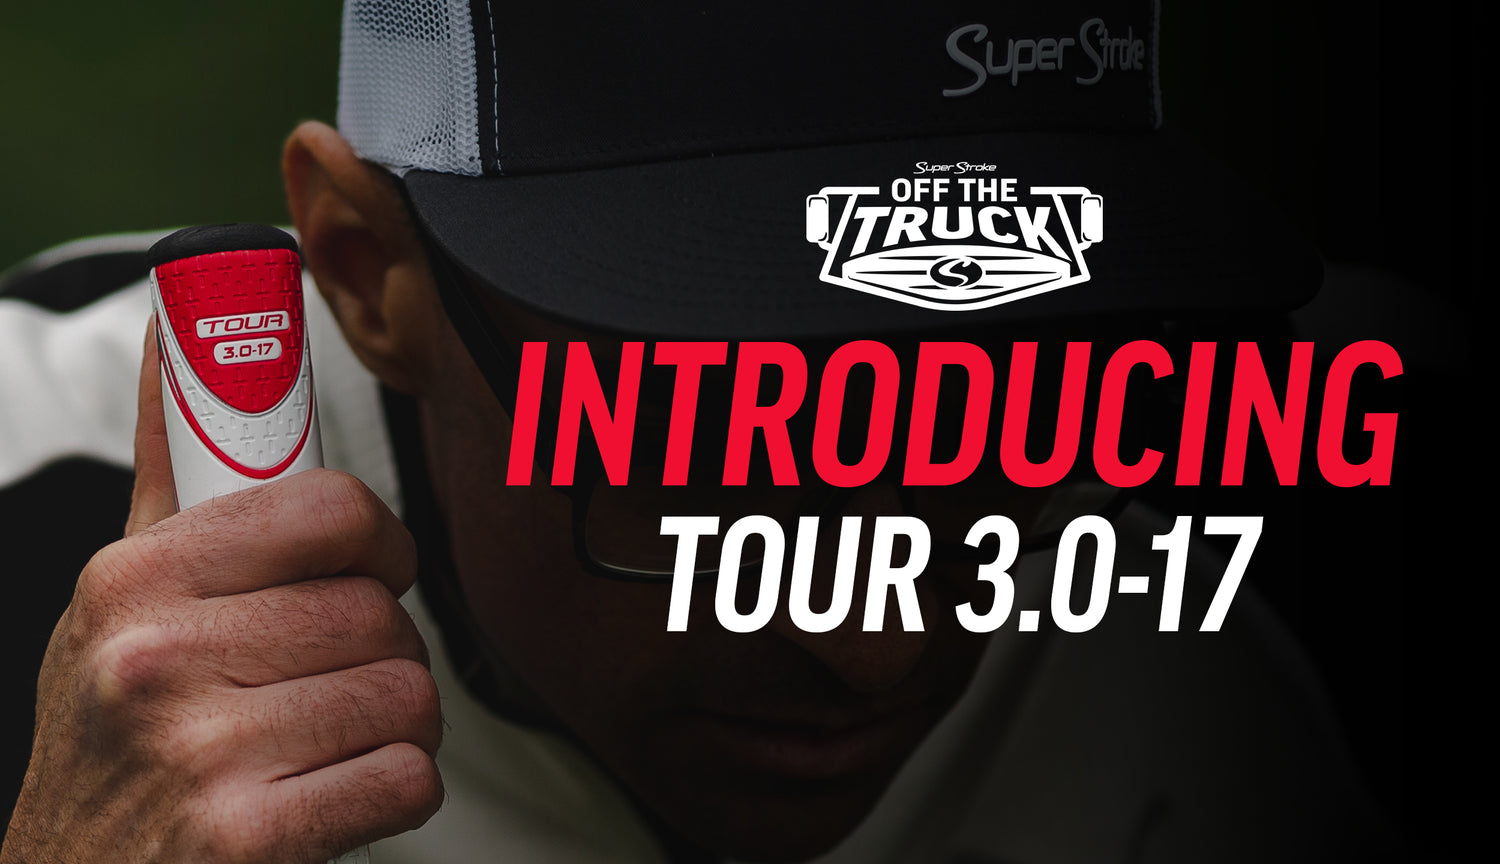 Introducing the Zenergy Tour 3.0 17” Off the Truck Putter Grip